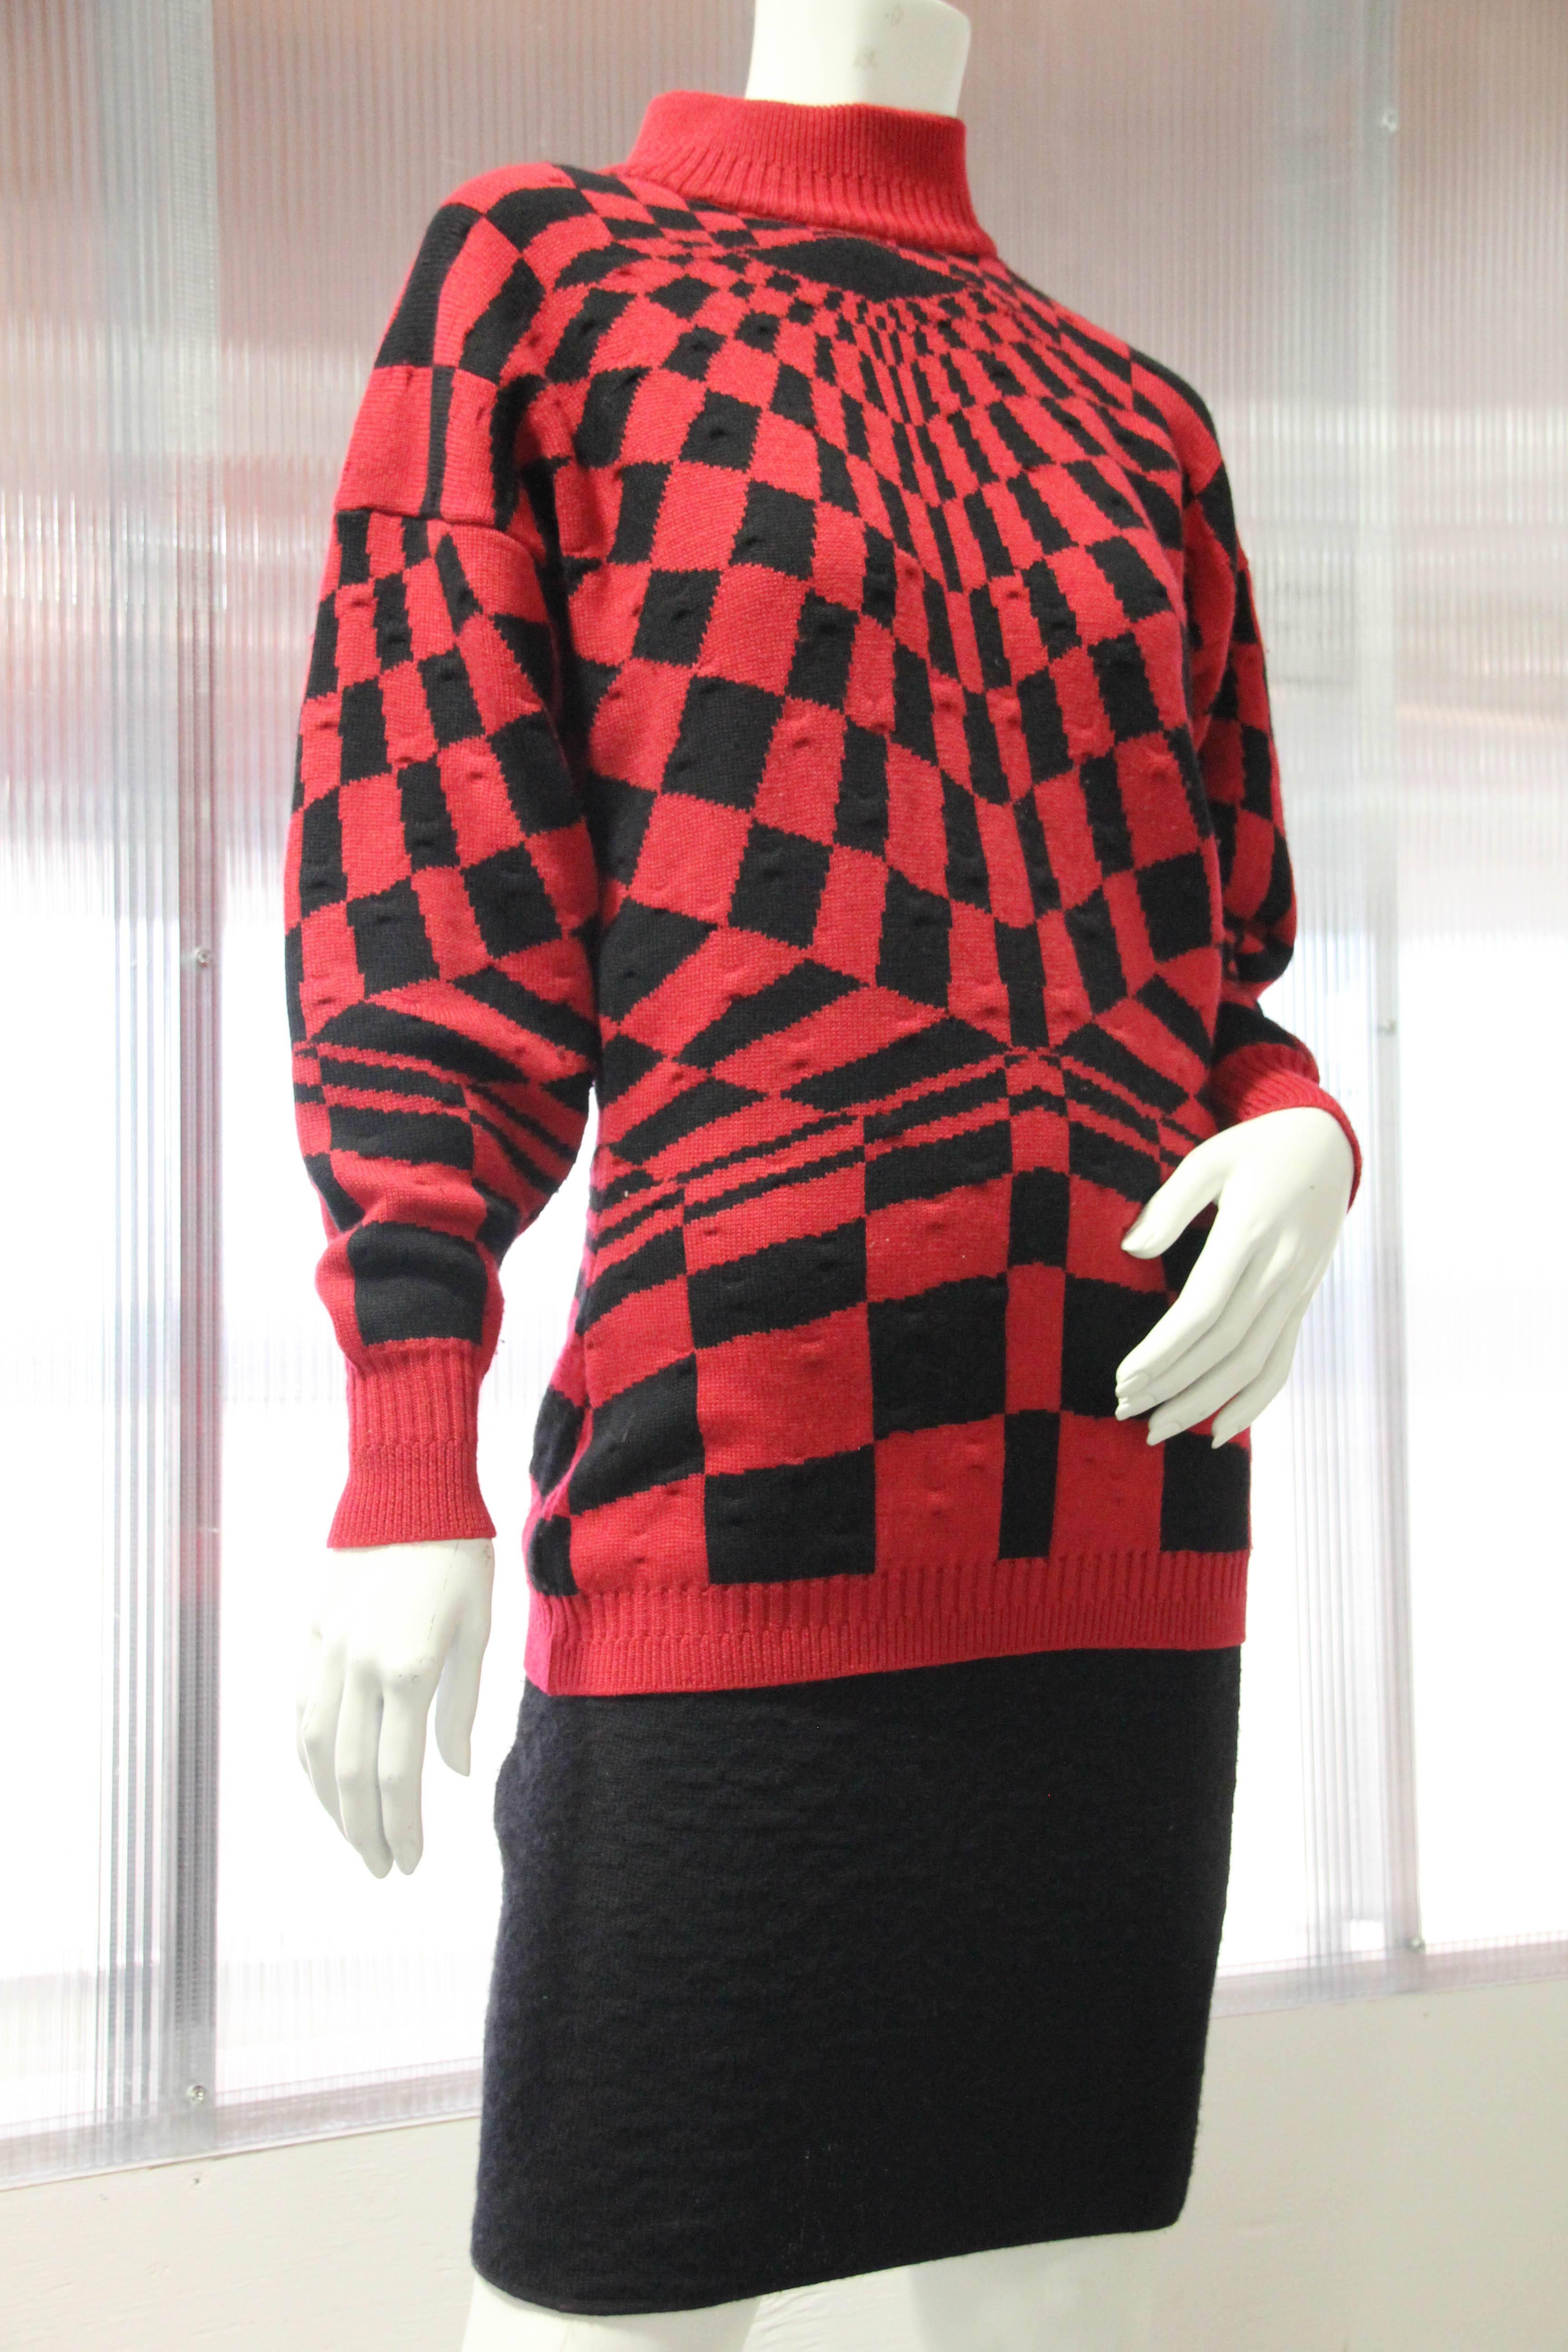 1980s Gianni Versace 3-Piece Knit Skirt Sweater & Scarf in Mod Red Checkerboard 3